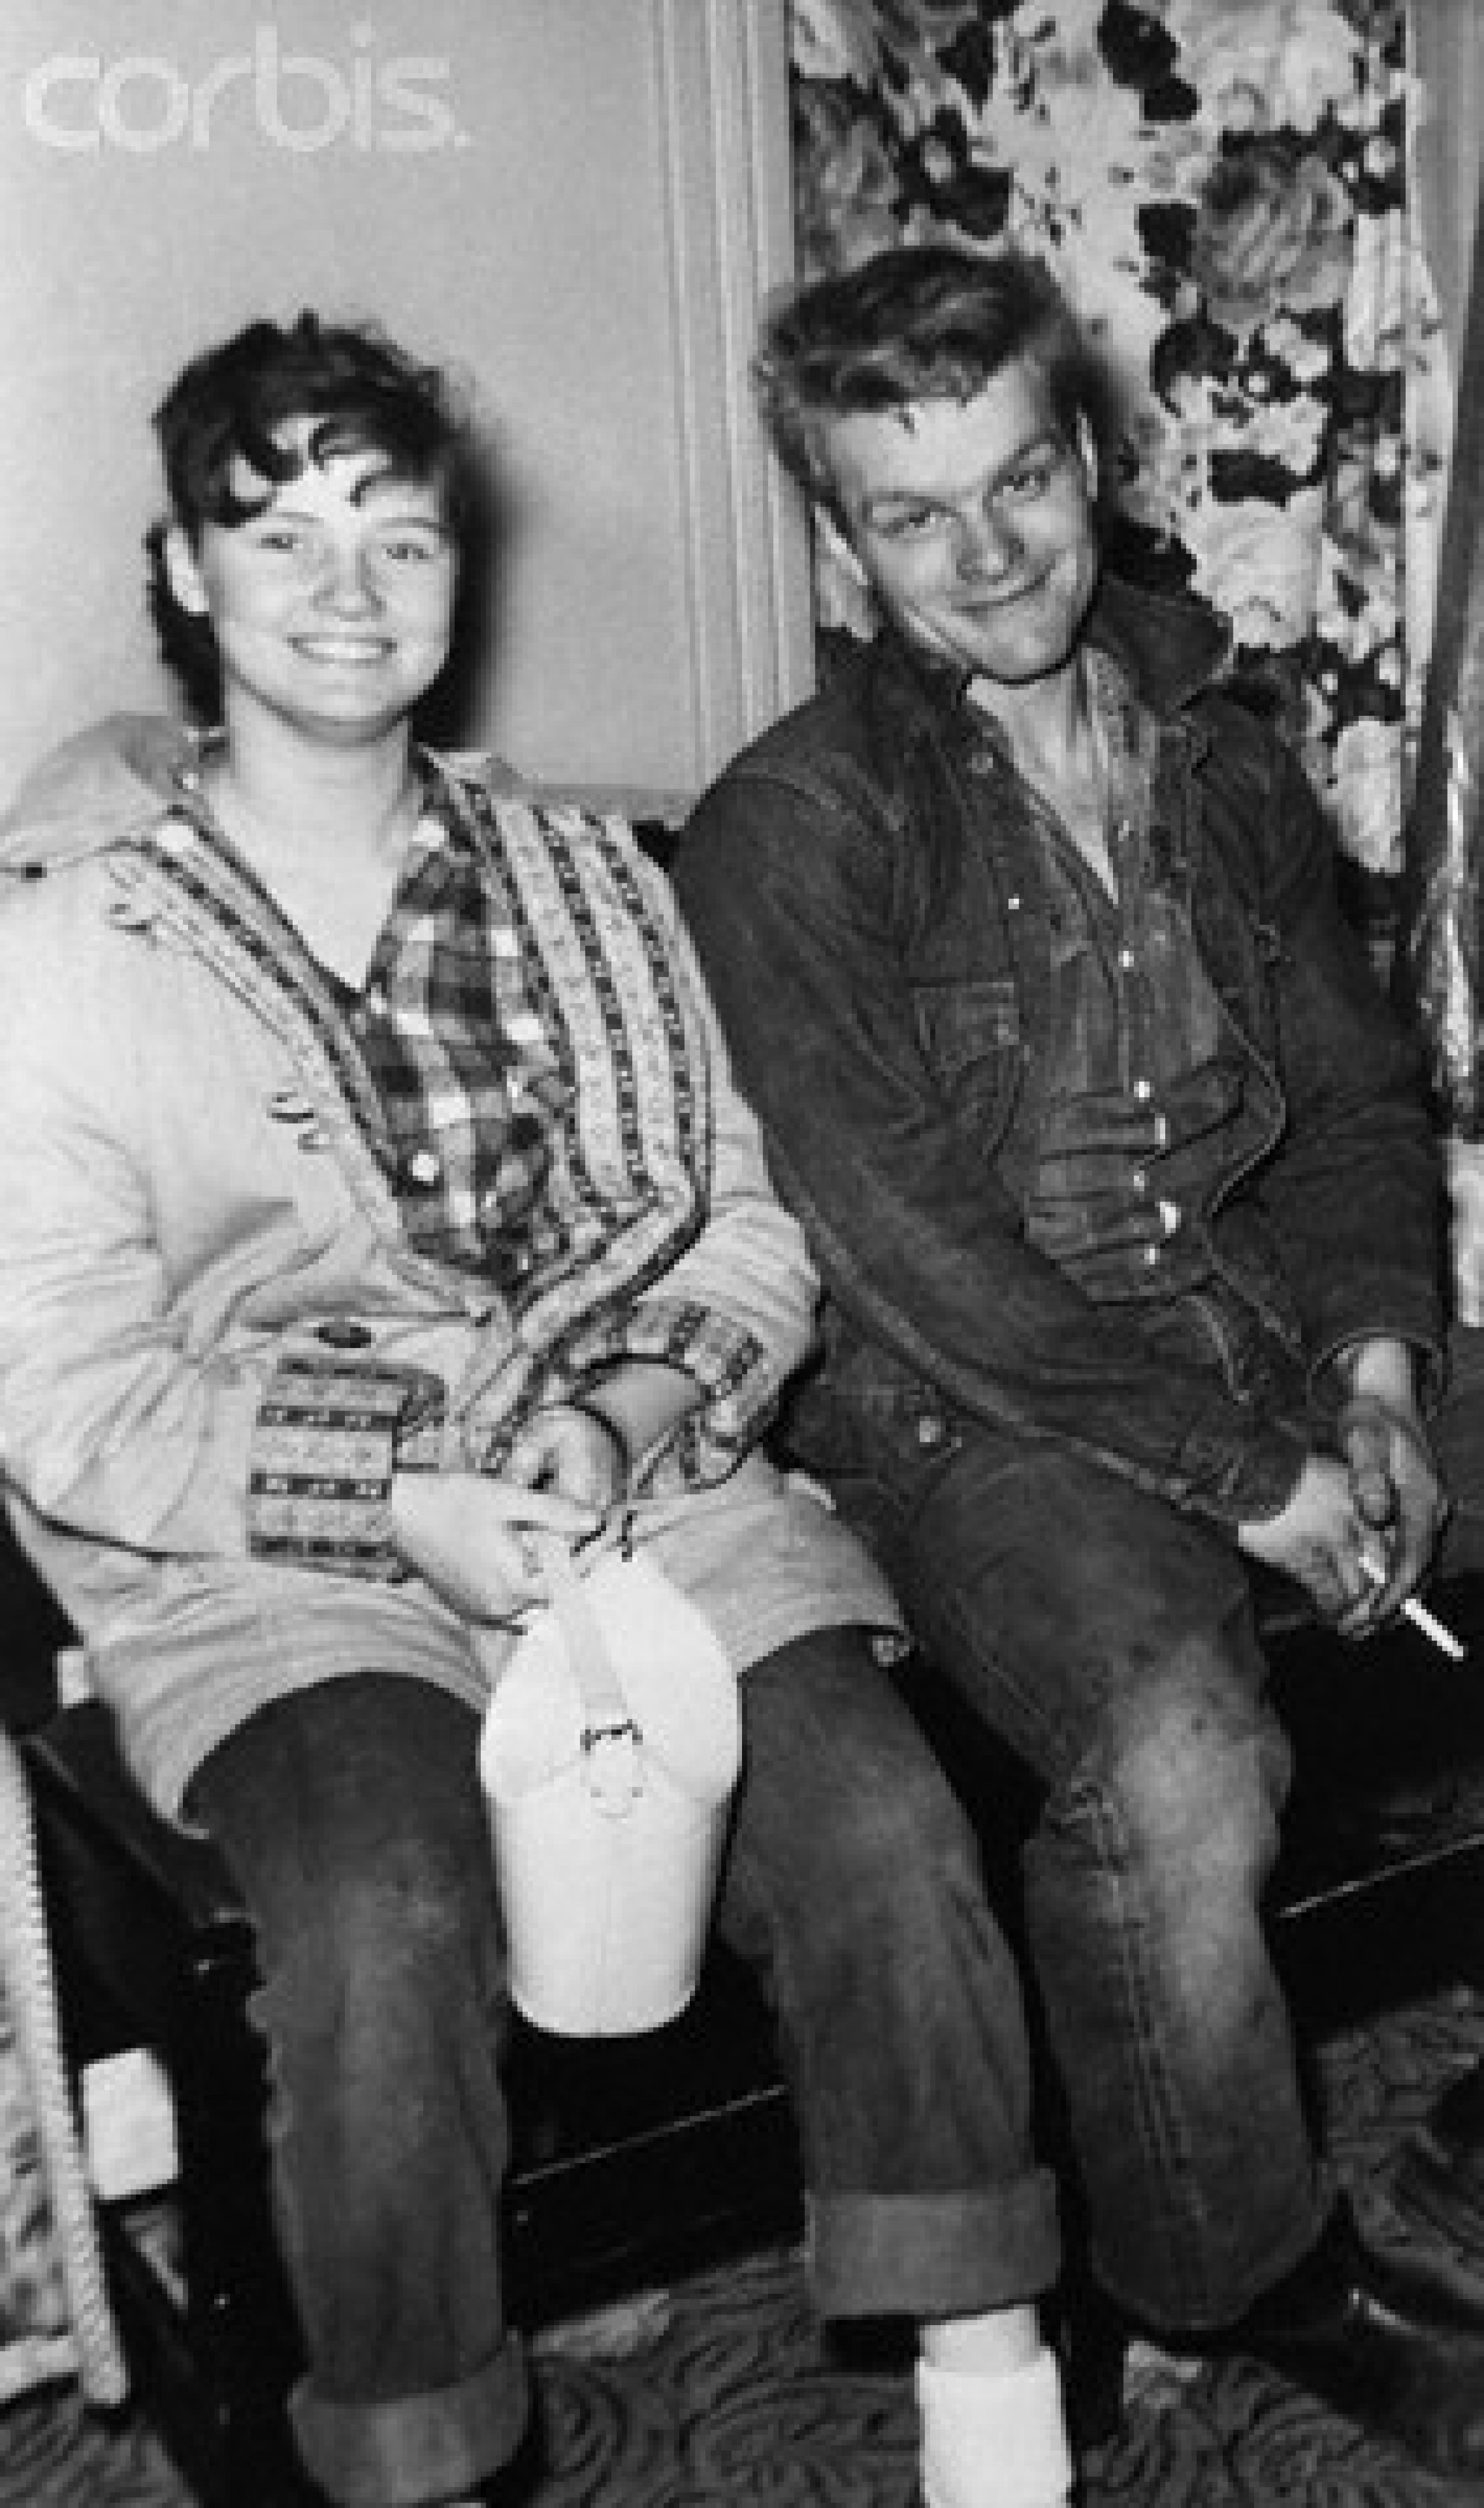 Charles Starkweather, 19, and Caril Ann Fugate, 14